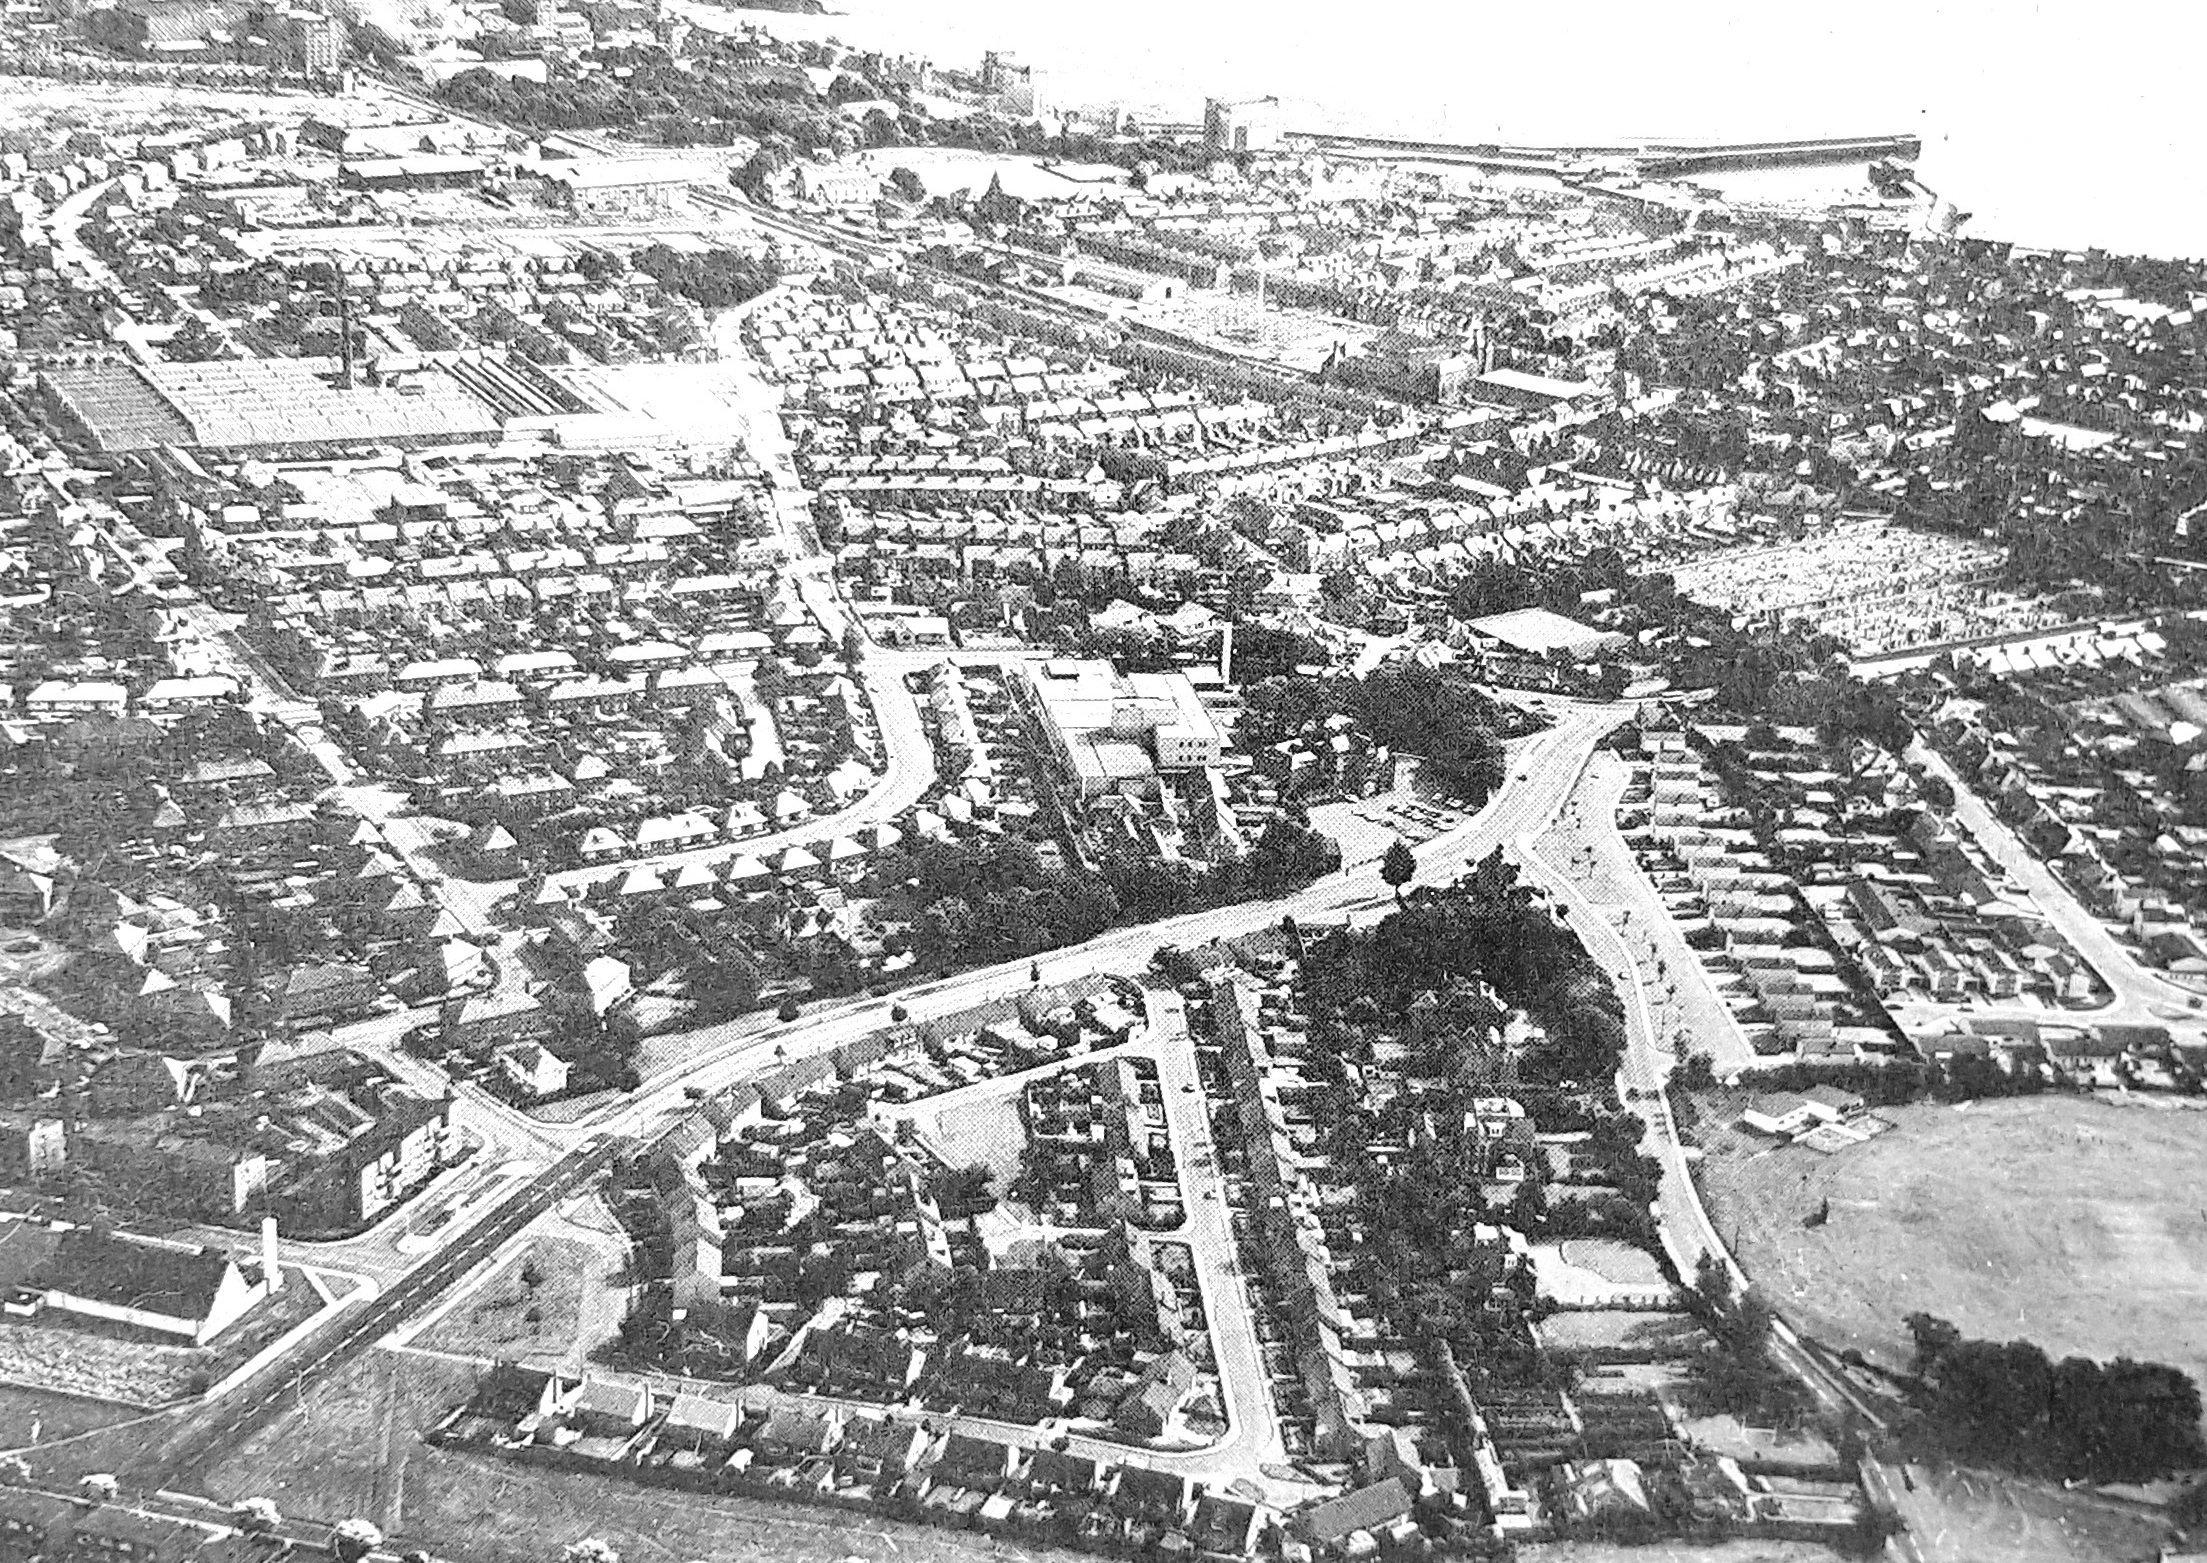 Forth Park Maternity Hospital sits in the middle of this shot.